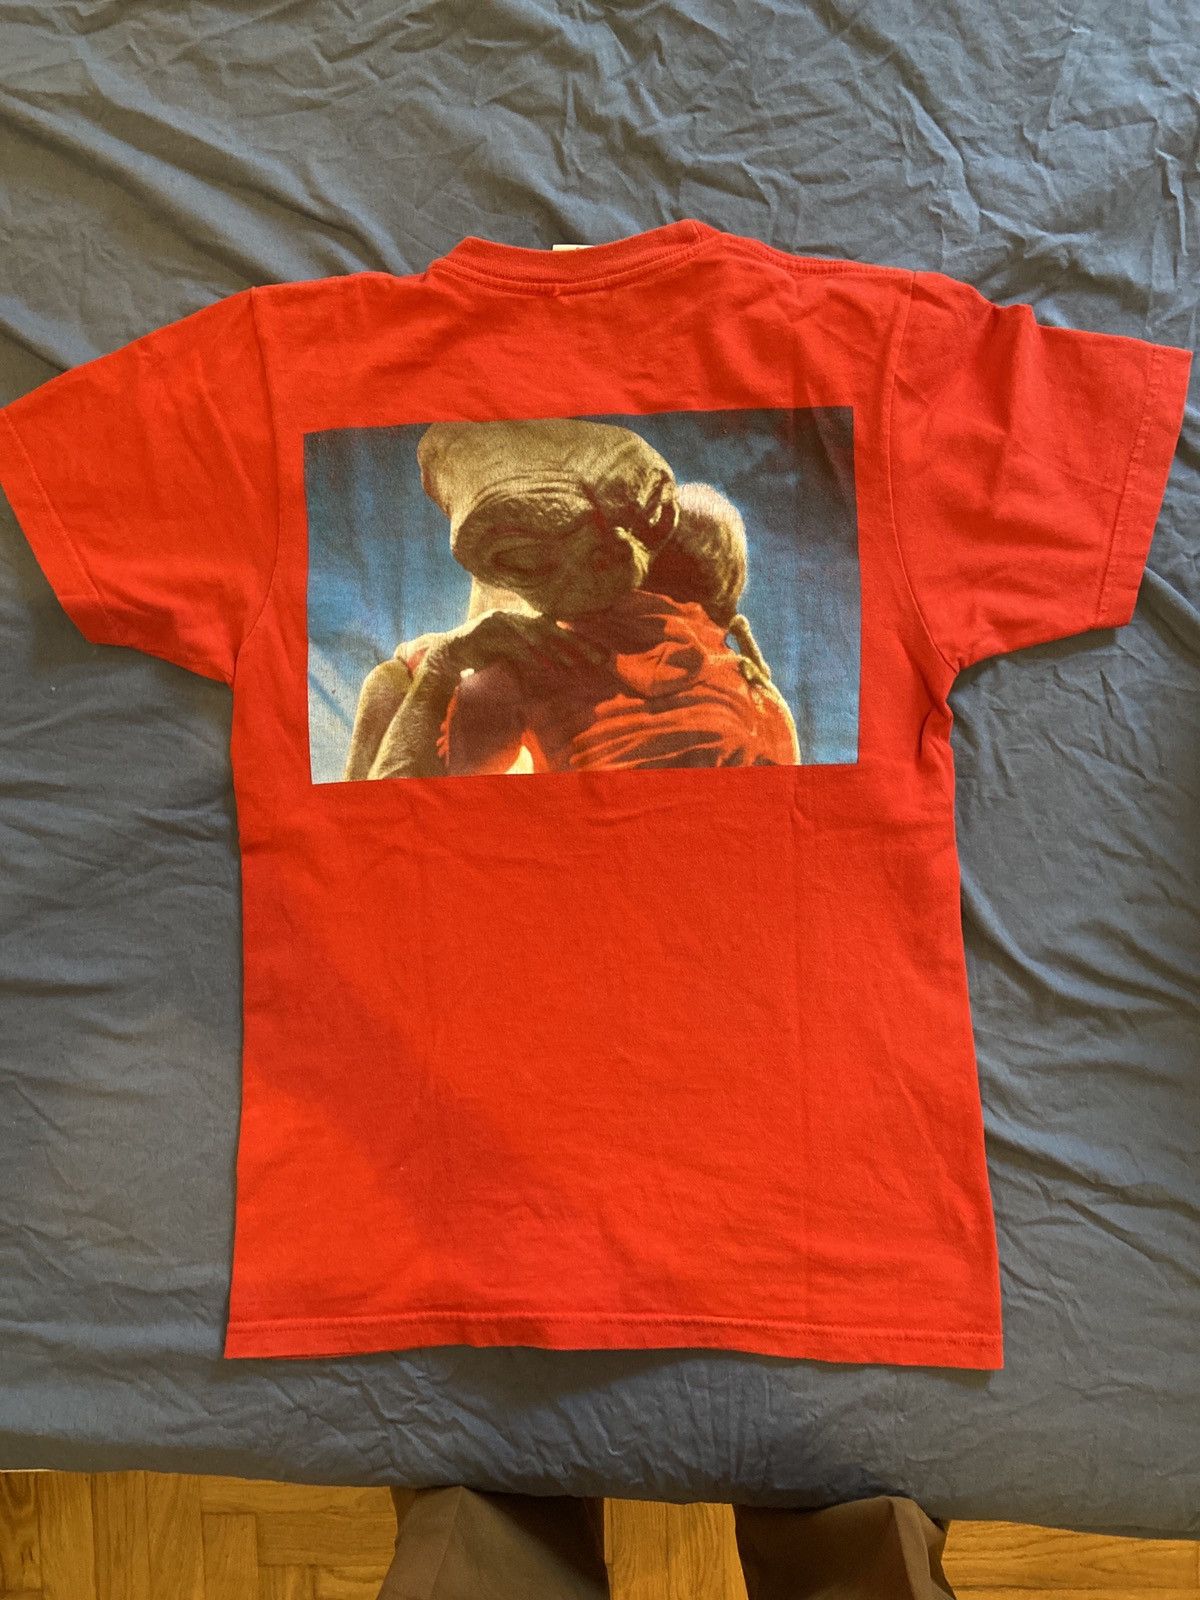 Supreme Supreme ET t-shirt red size S VG condition FW15 Size US S / EU 44-46 / 1 - 2 Preview